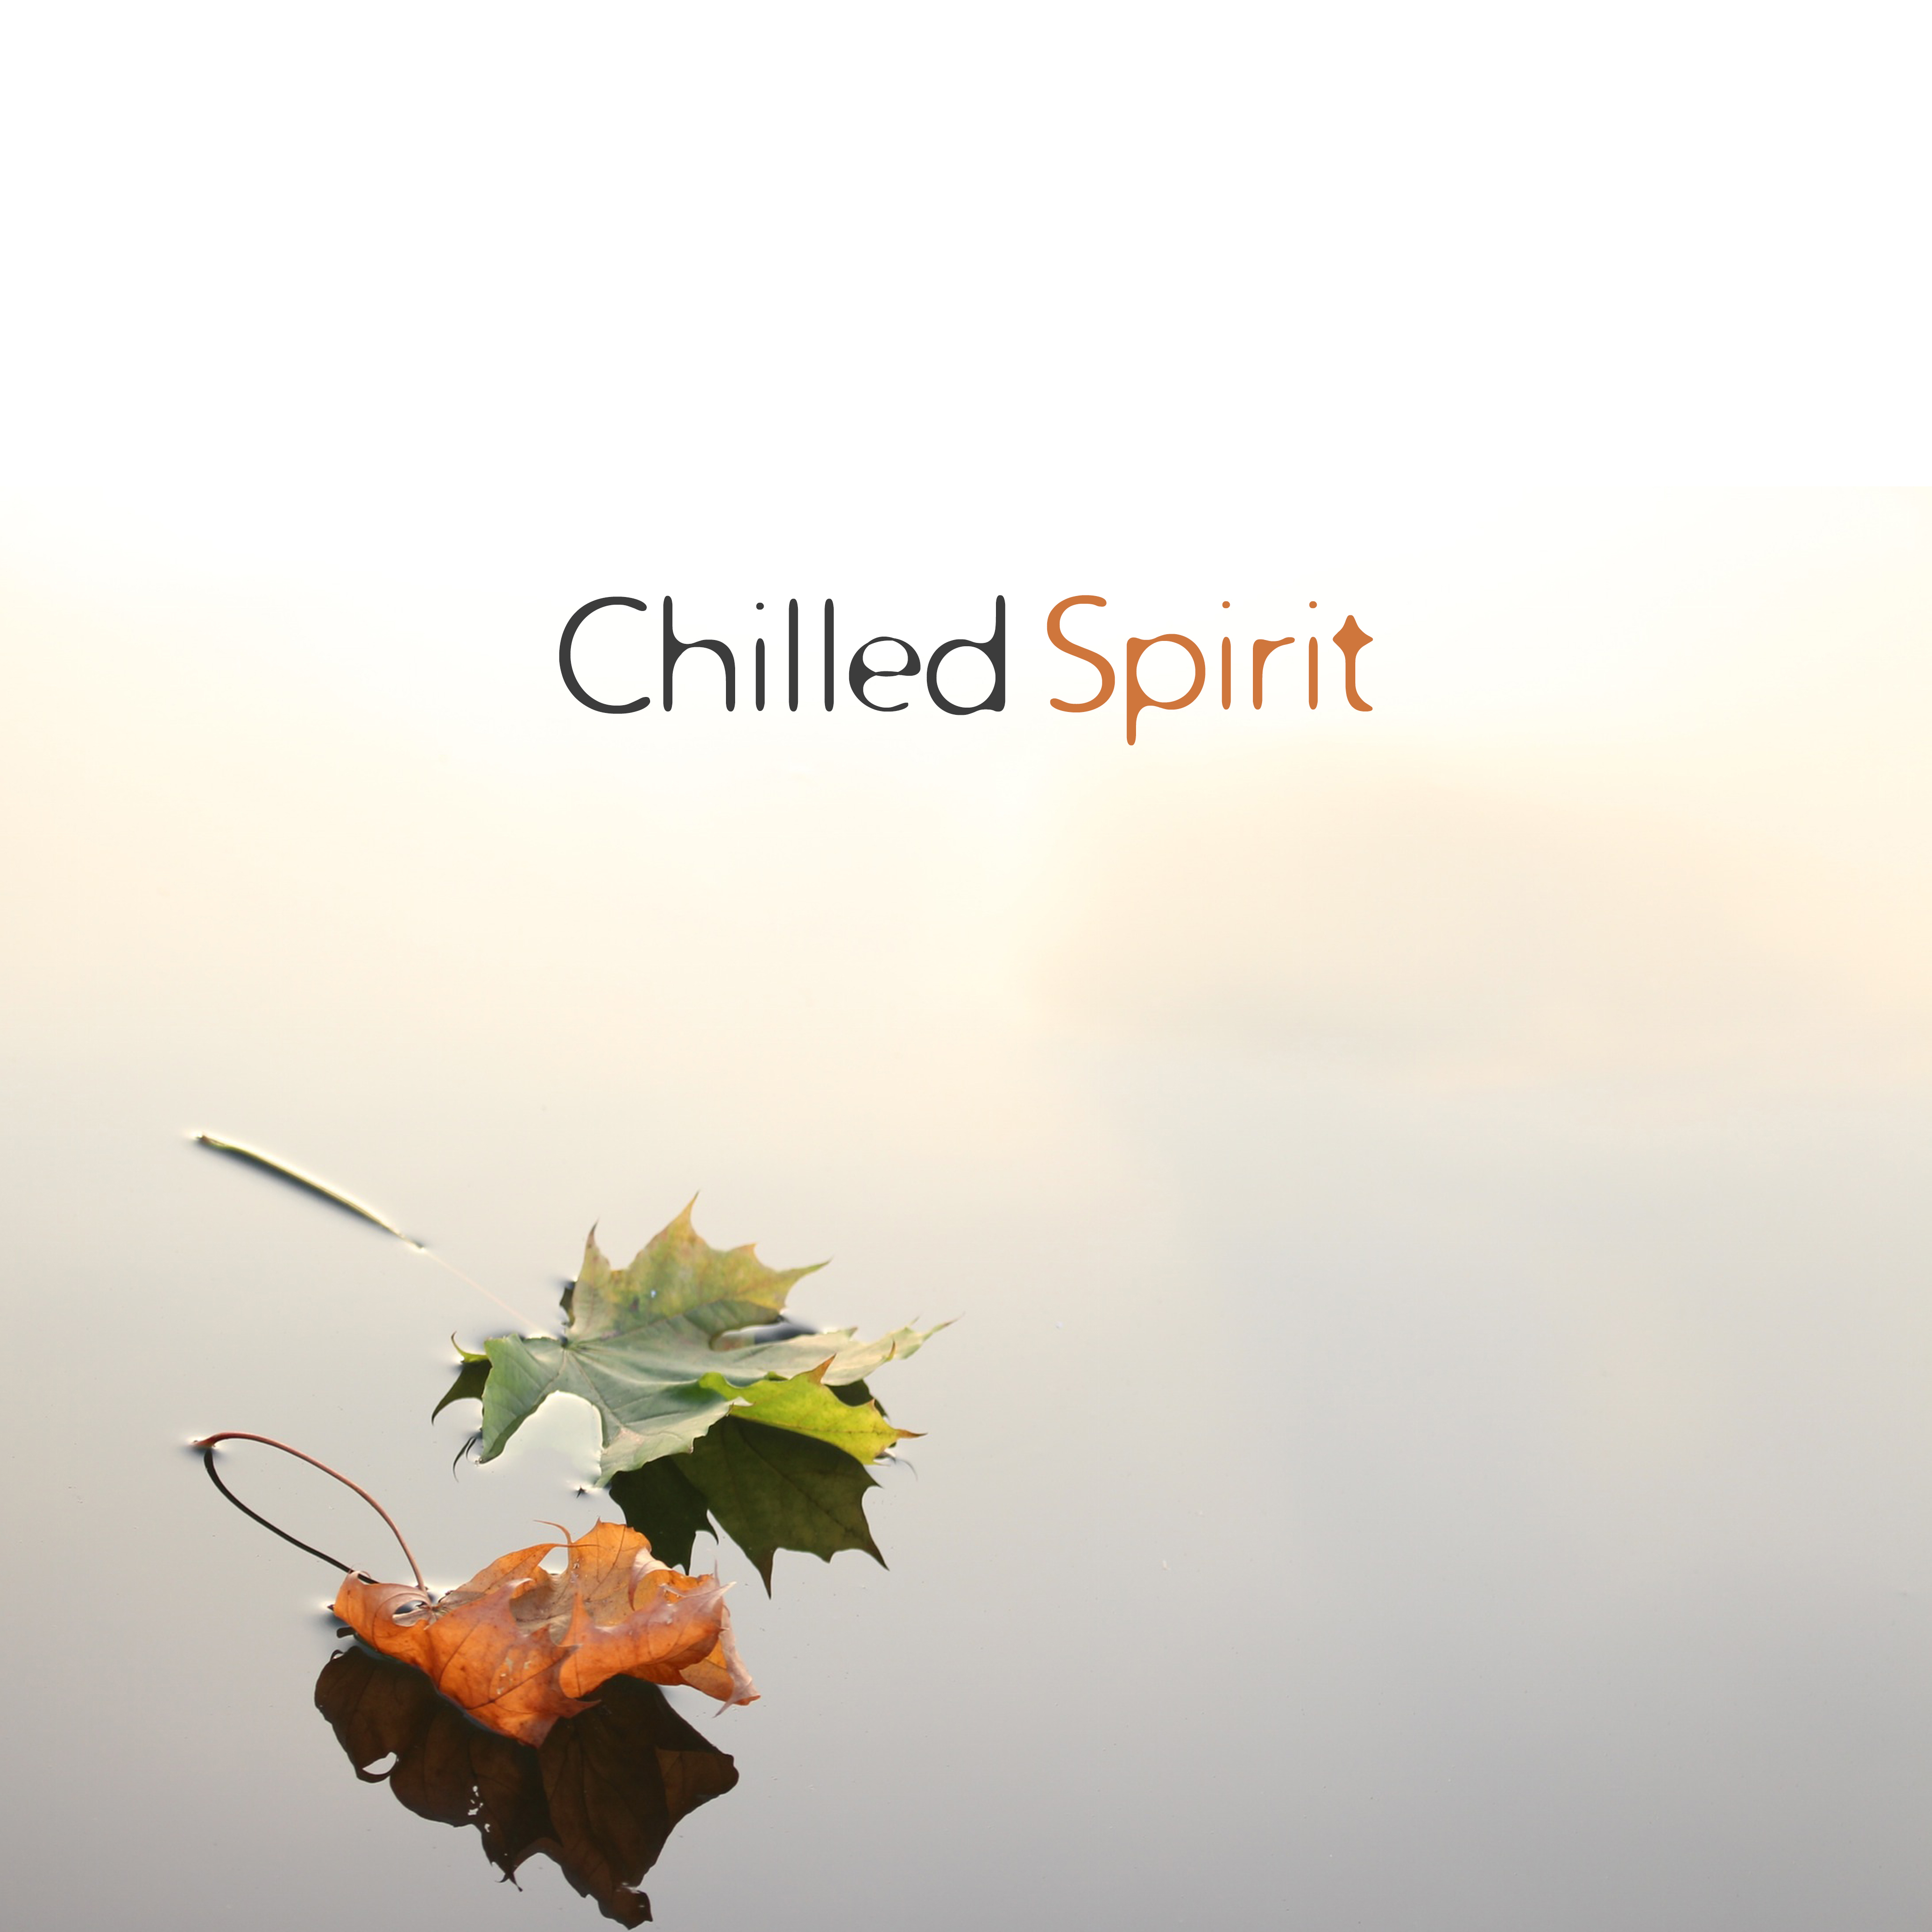 Chilled Spirit – Nature Sounds, Calming New Age Music, Relax Time, Bliss, Zen